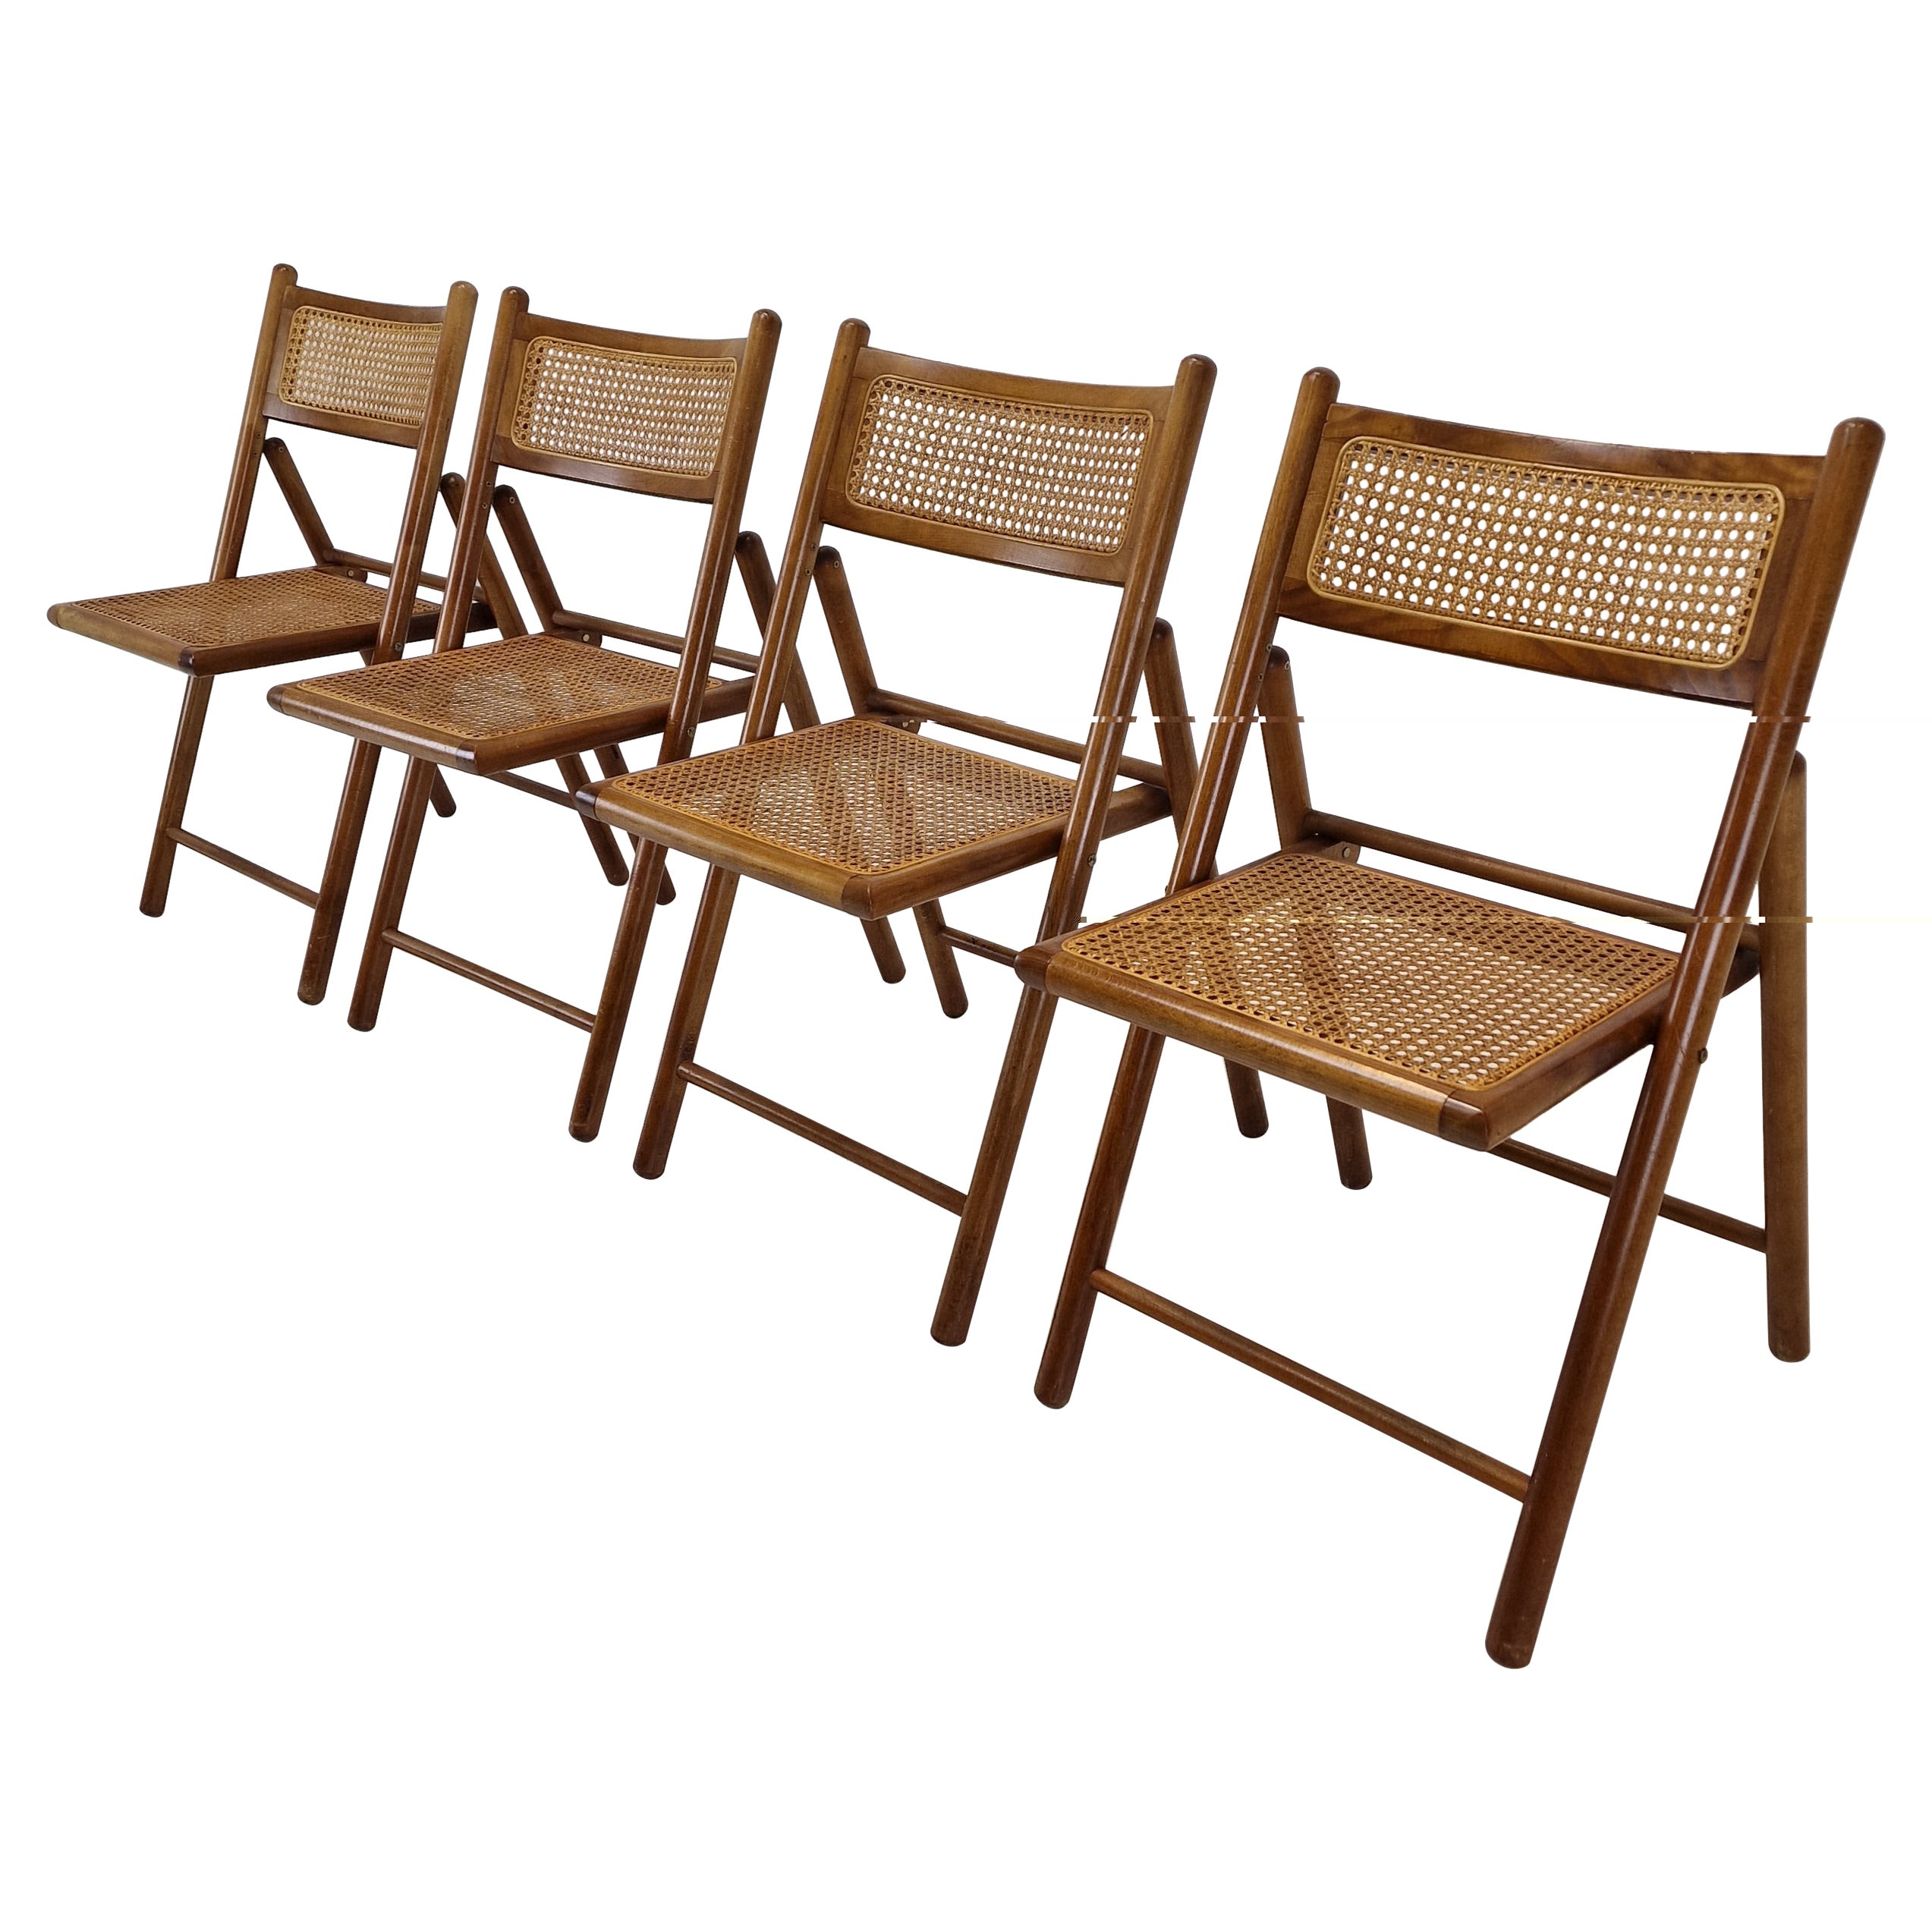 Set of 4 Italian Folding Chairs with Rattan, 1980s For Sale